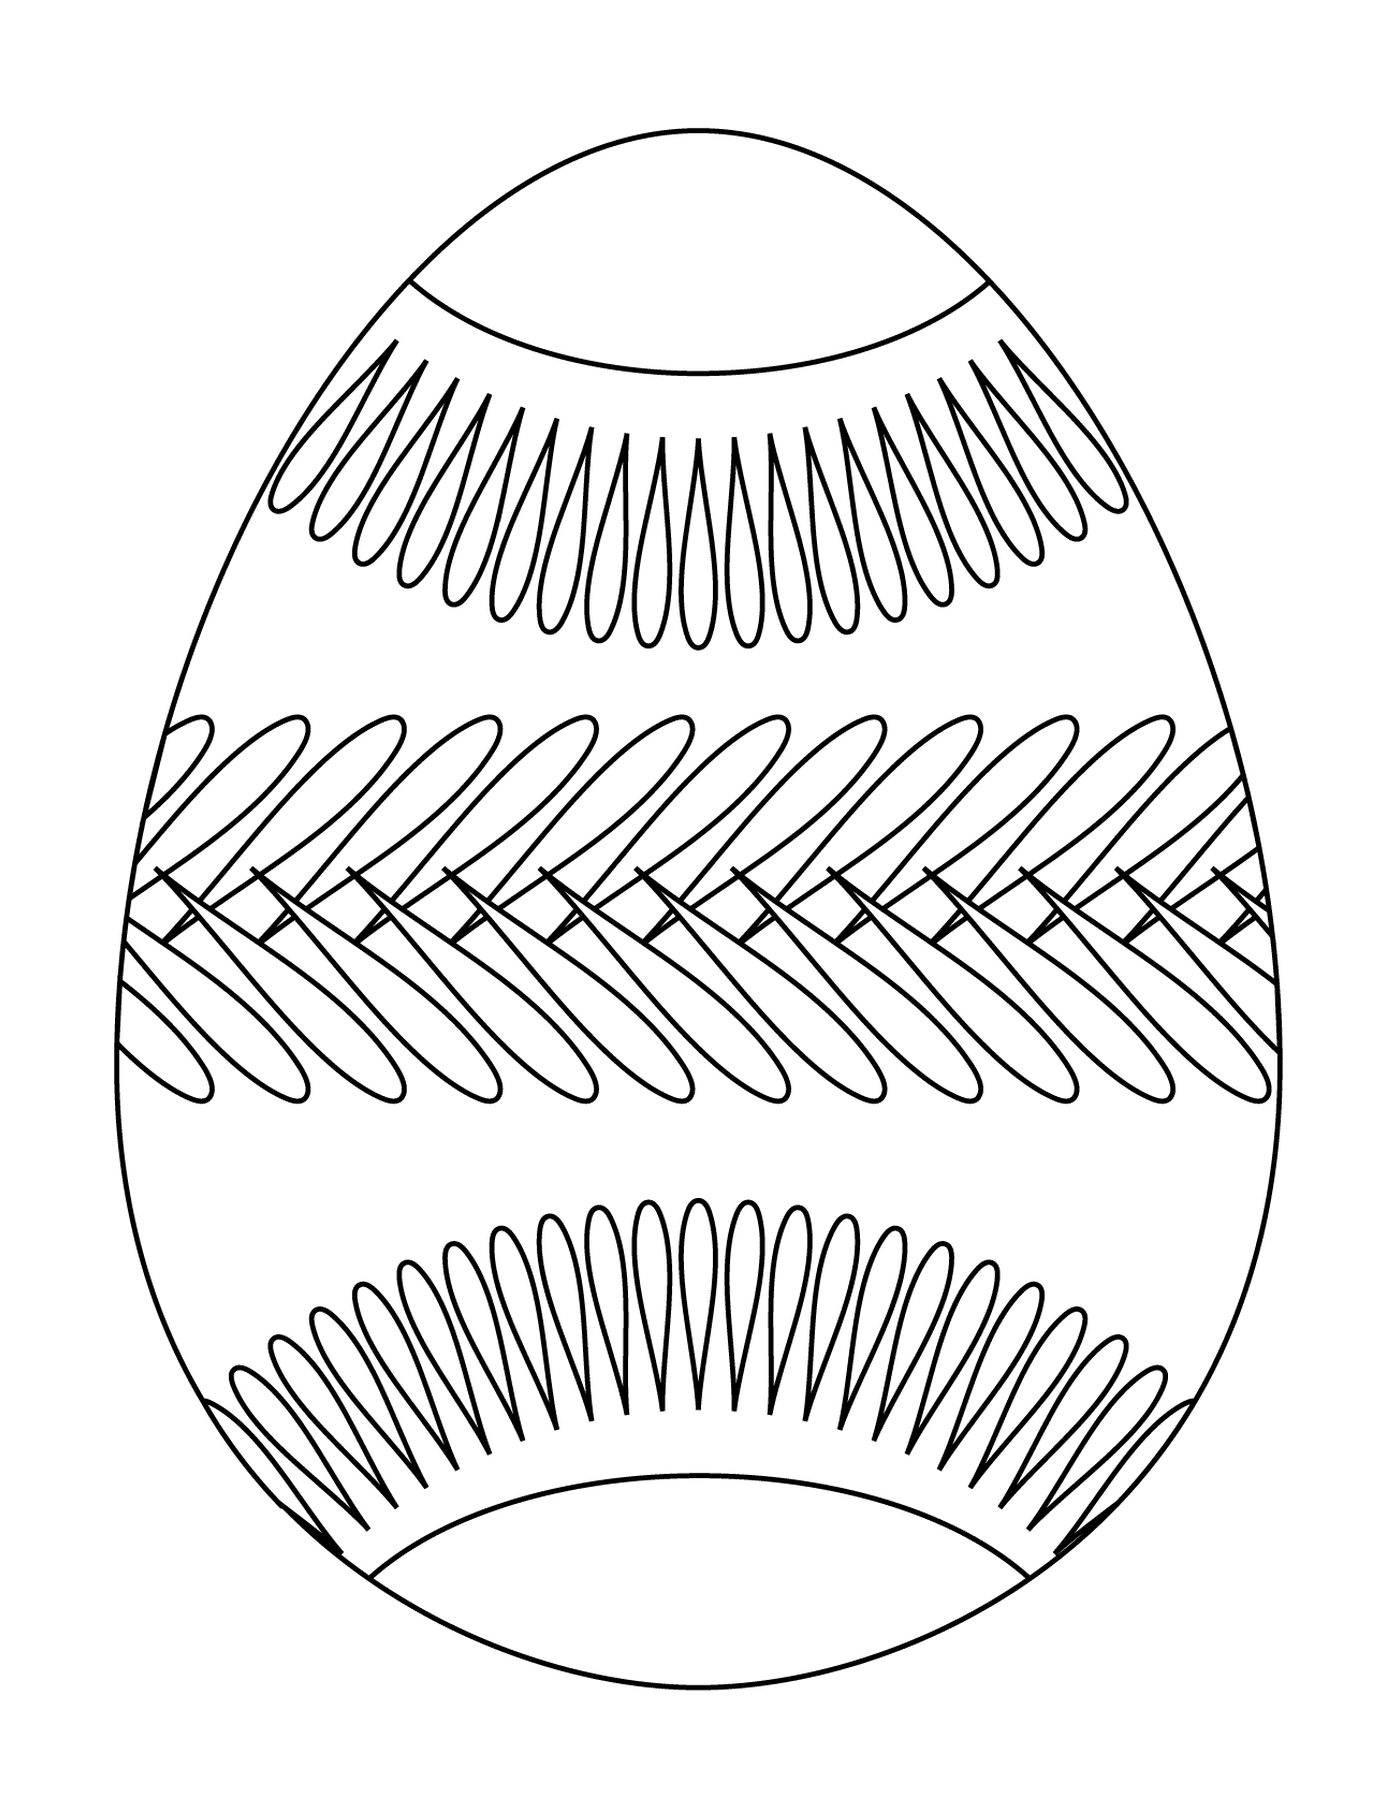  Easter egg with belt pattern, decorated egg 